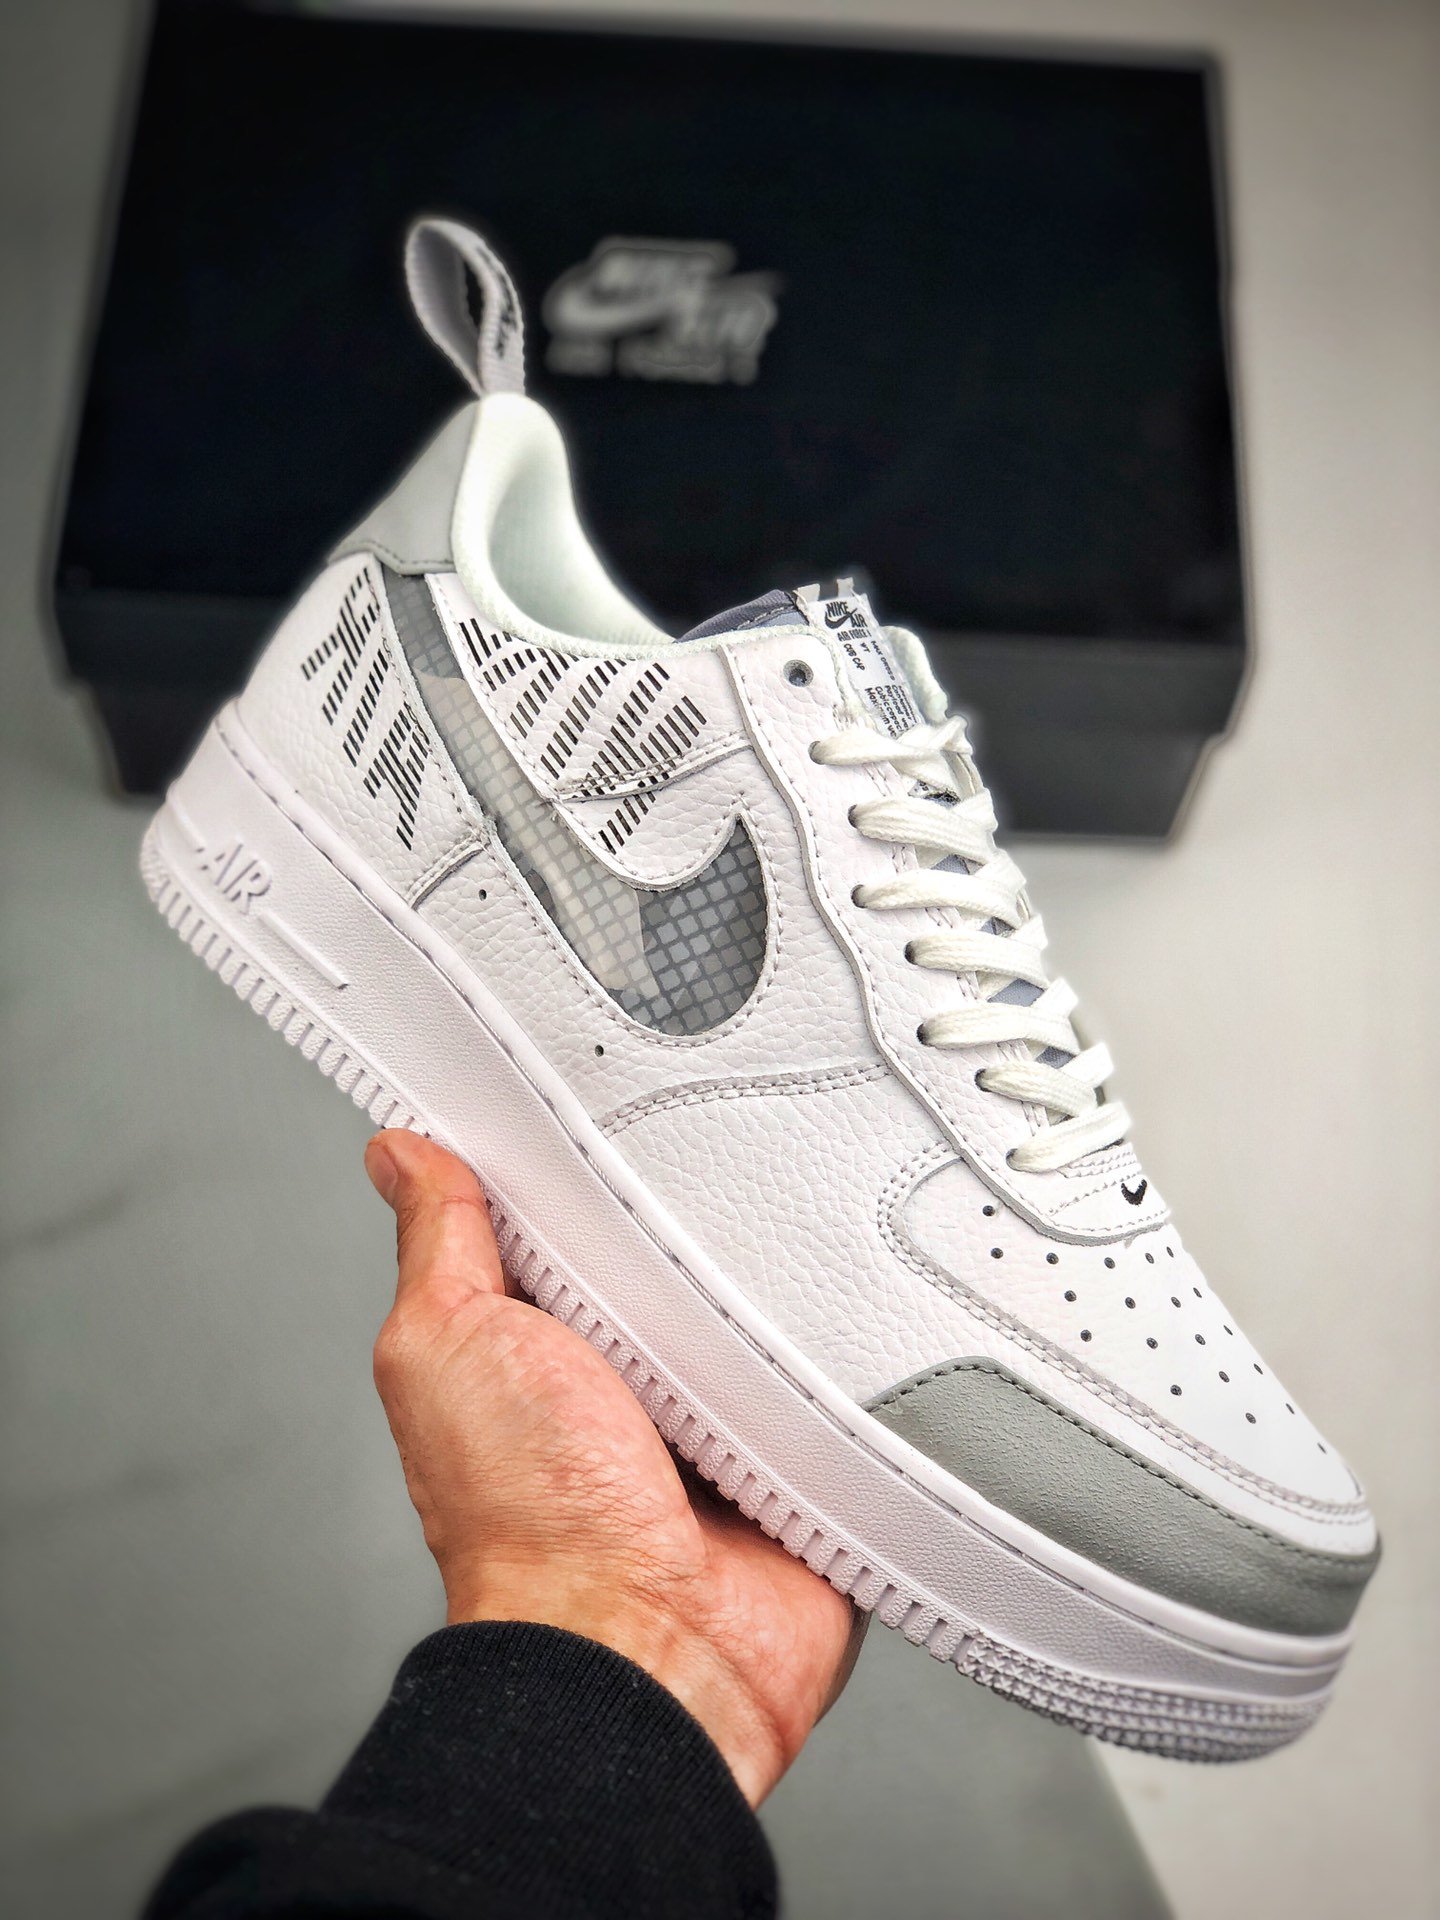 Nike Air AF Force 1 Low "Under Constructioan" White/Wolf Grey-Black Shoes